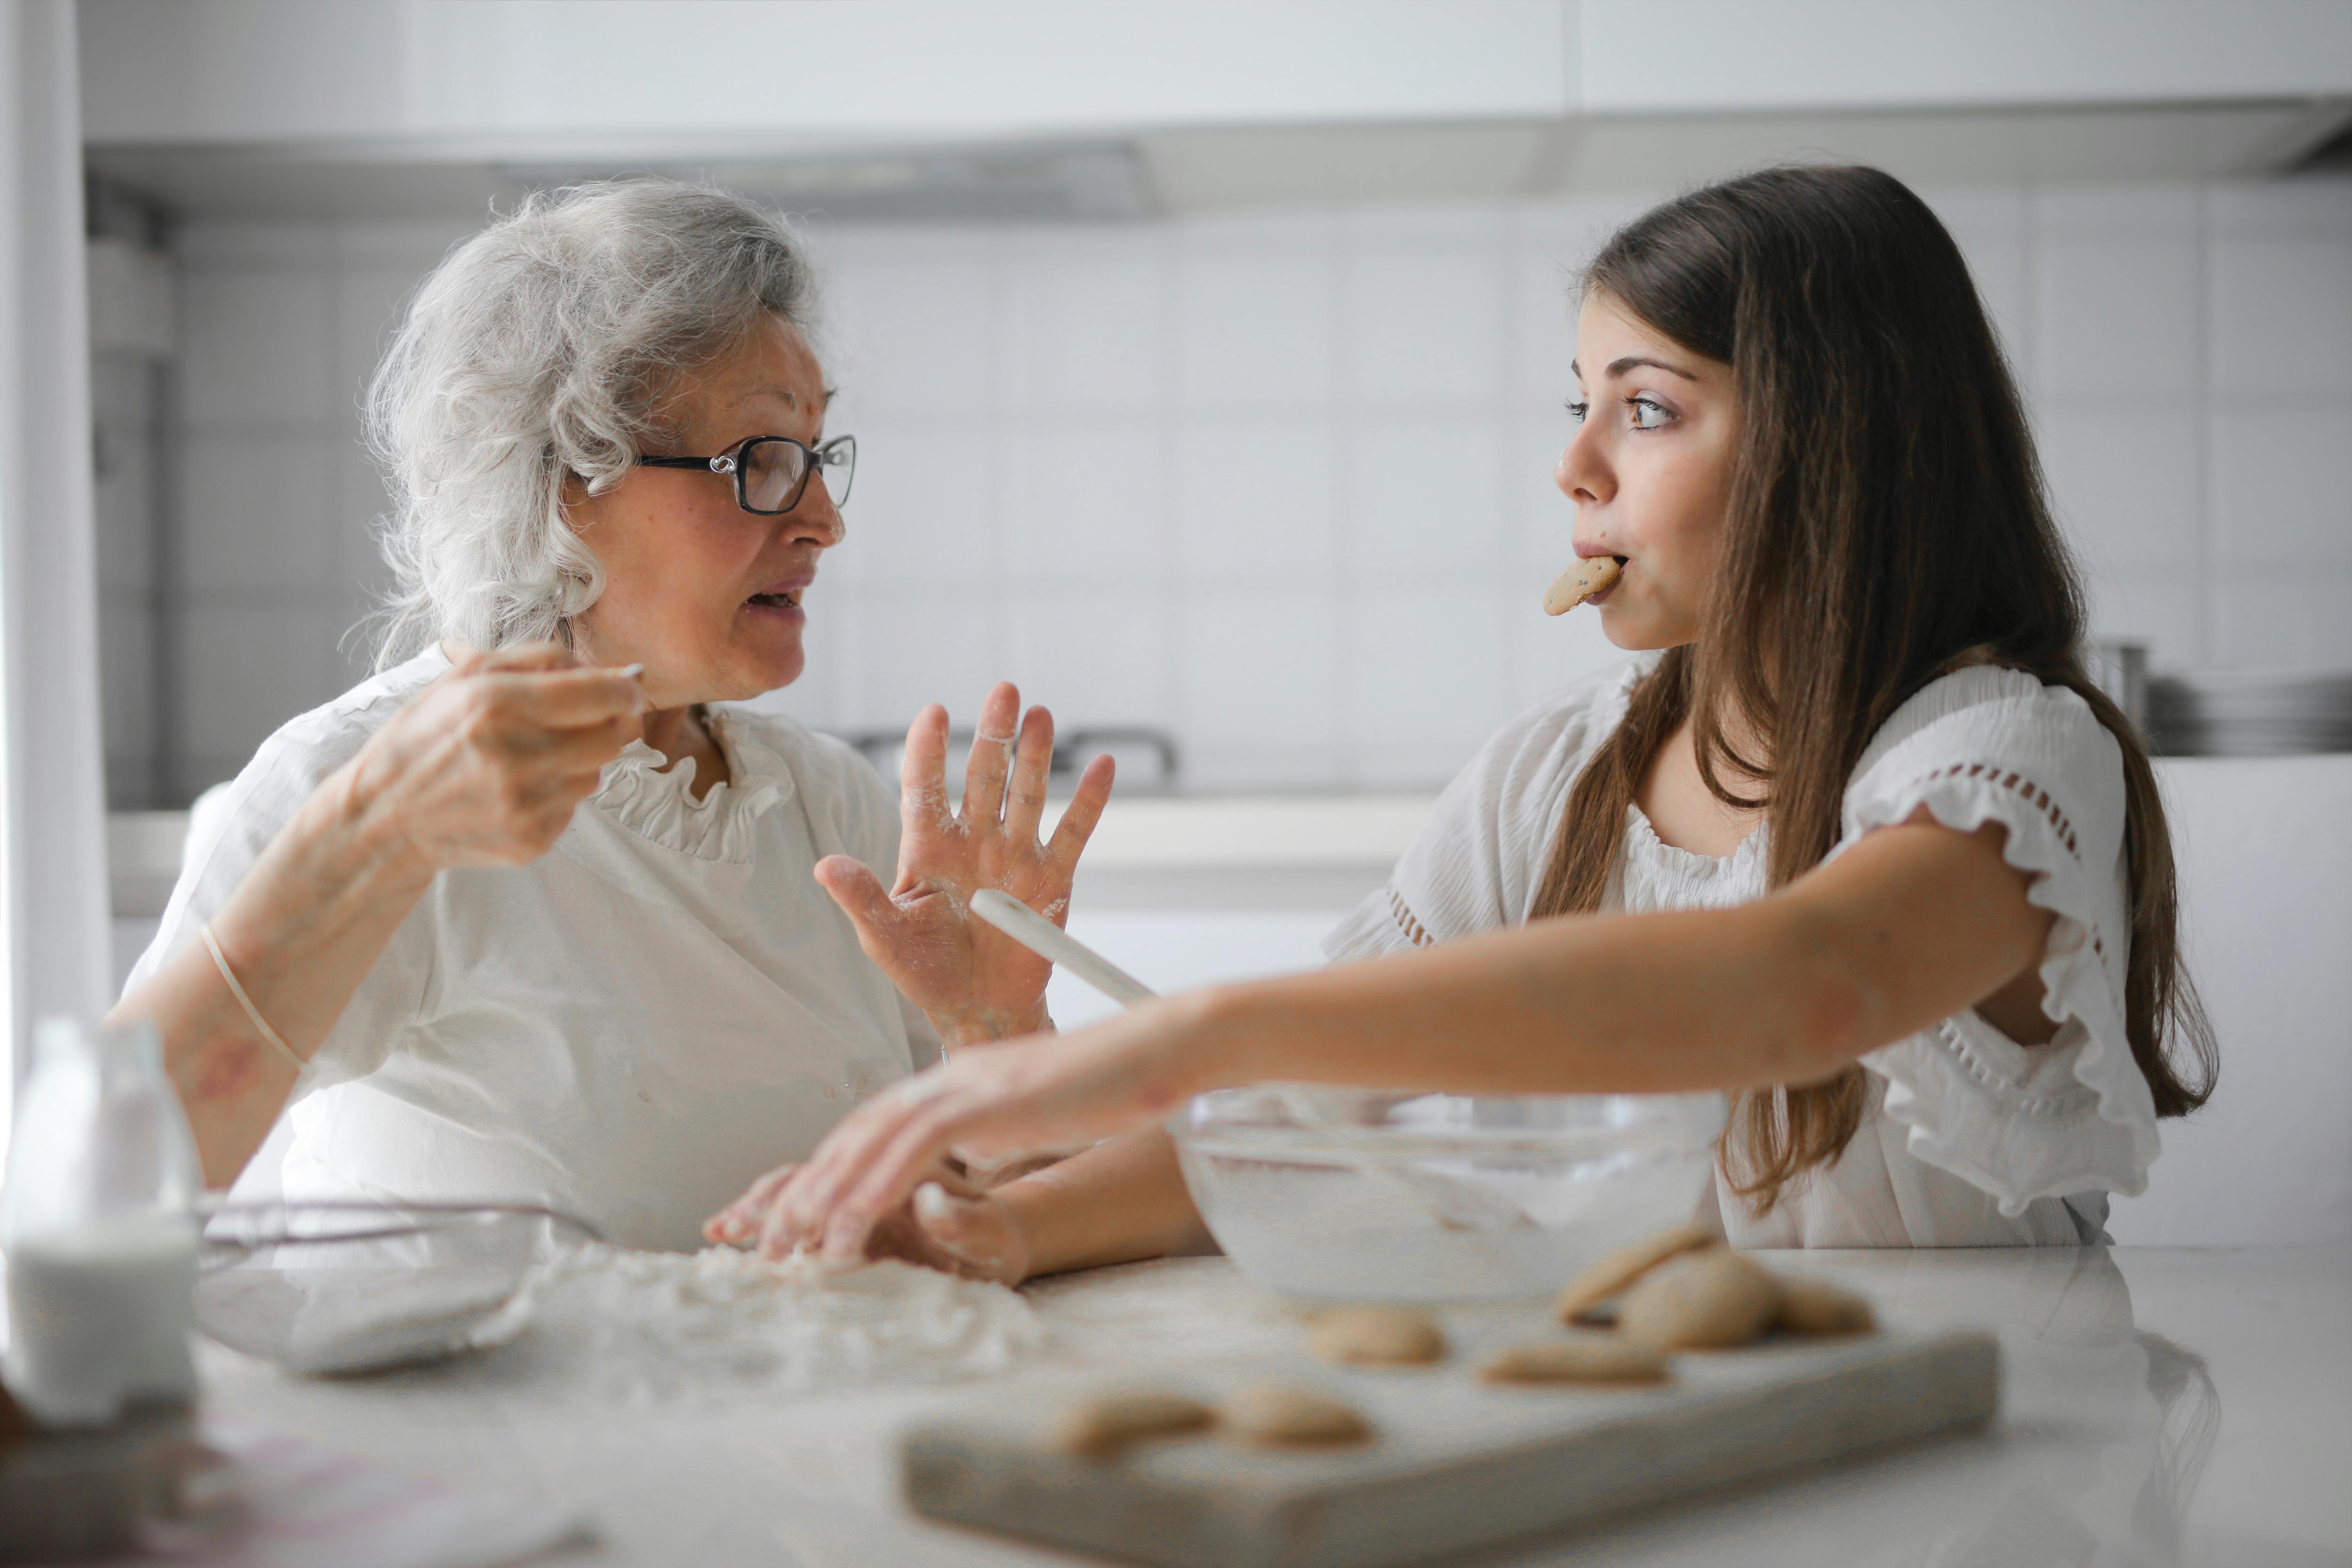 Granddaughter baking with her grandmother | Source: Pexels